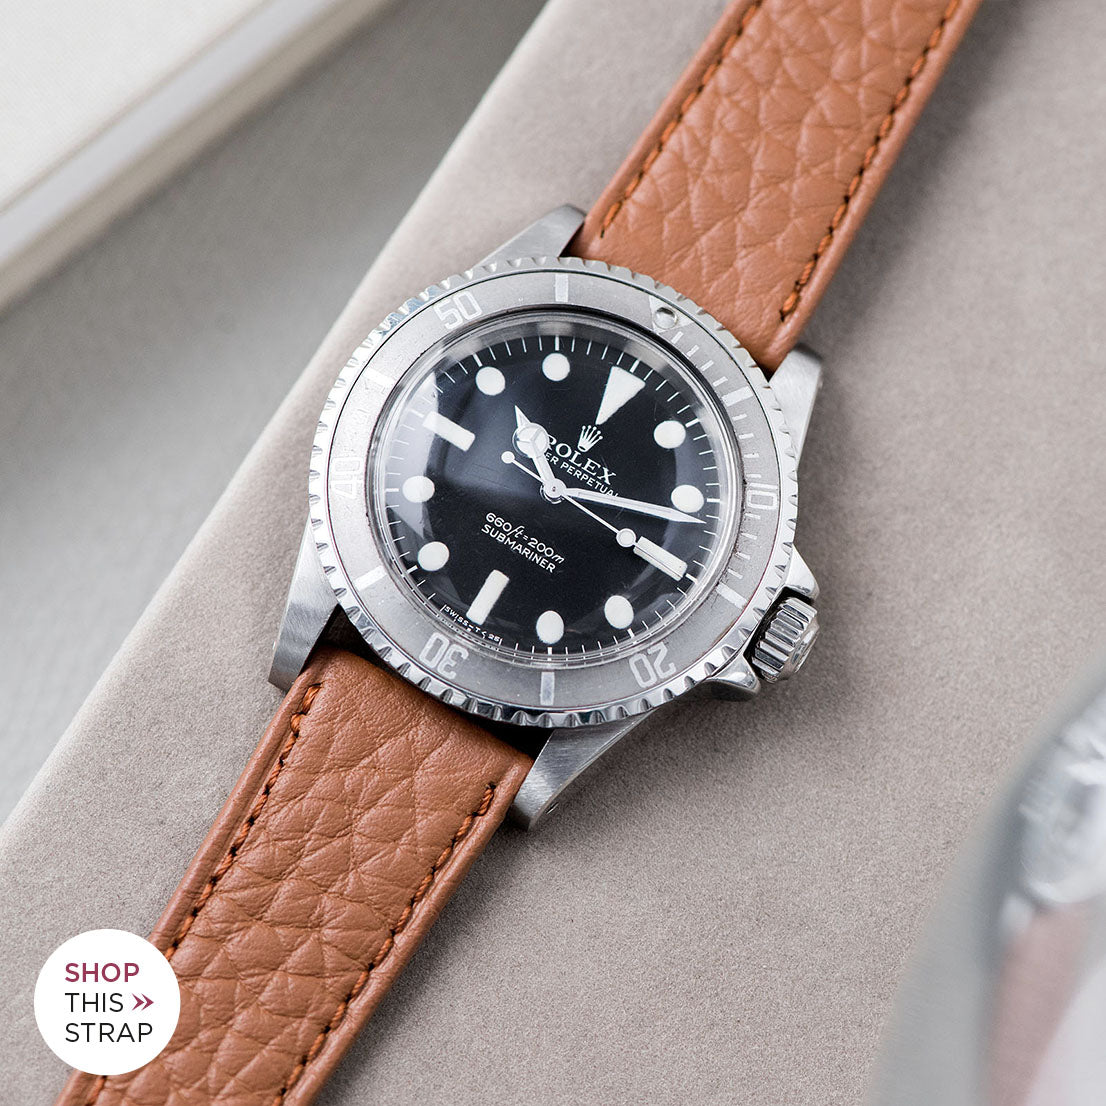 Bulang and Sons_Strap Guide_The Rolex 5513 Faded Maxi Submariner_Taurillon Brown Speedy Leather Watch Strap